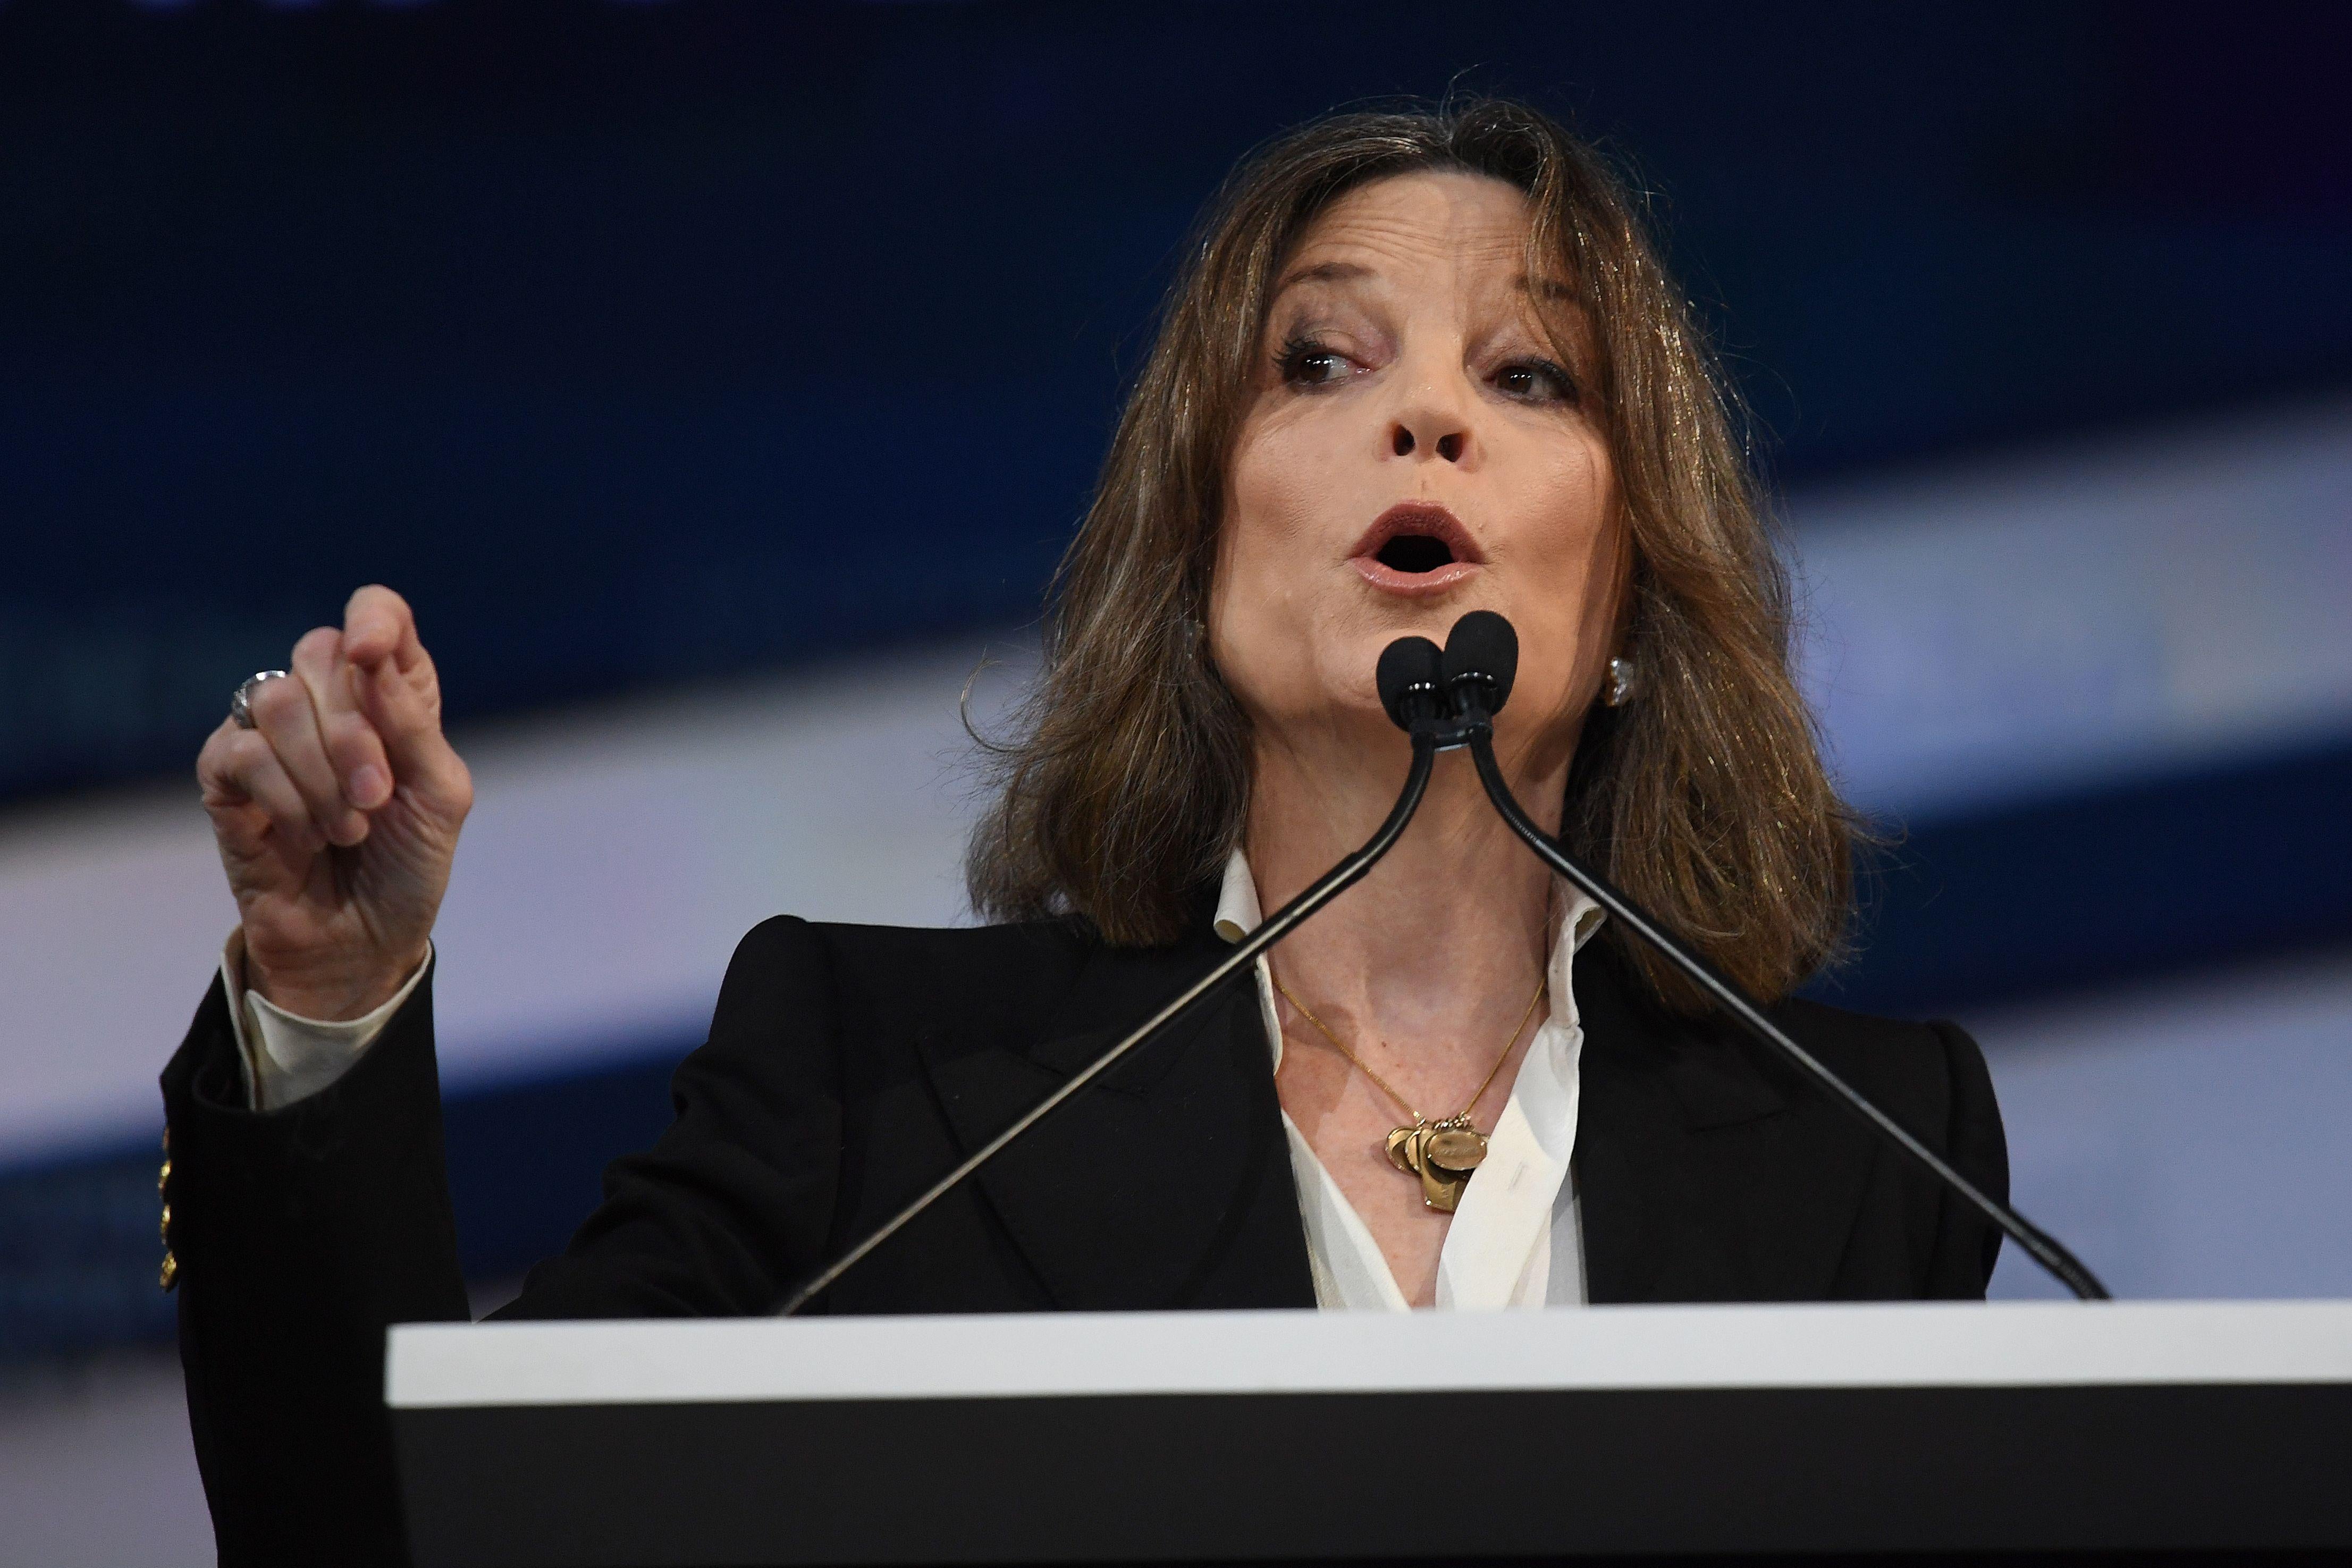 Marianne Williamson gesturing as she speaks in front of a podium.